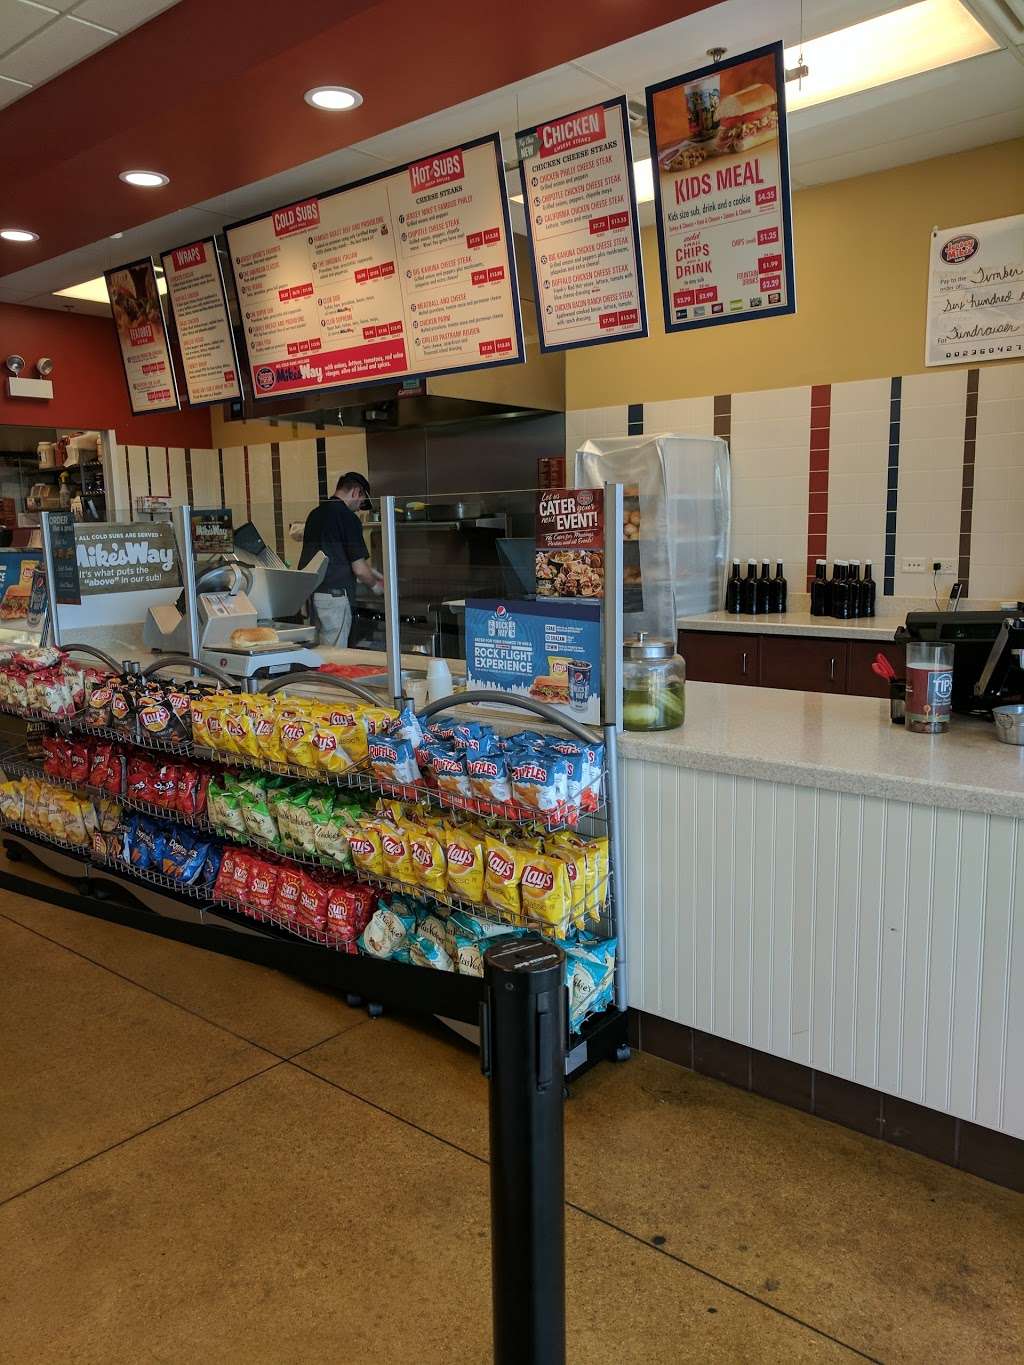 Jersey Mikes Subs | 4610 Hoffman Blvd, Hoffman Estates, IL 60192 | Phone: (224) 802-2922